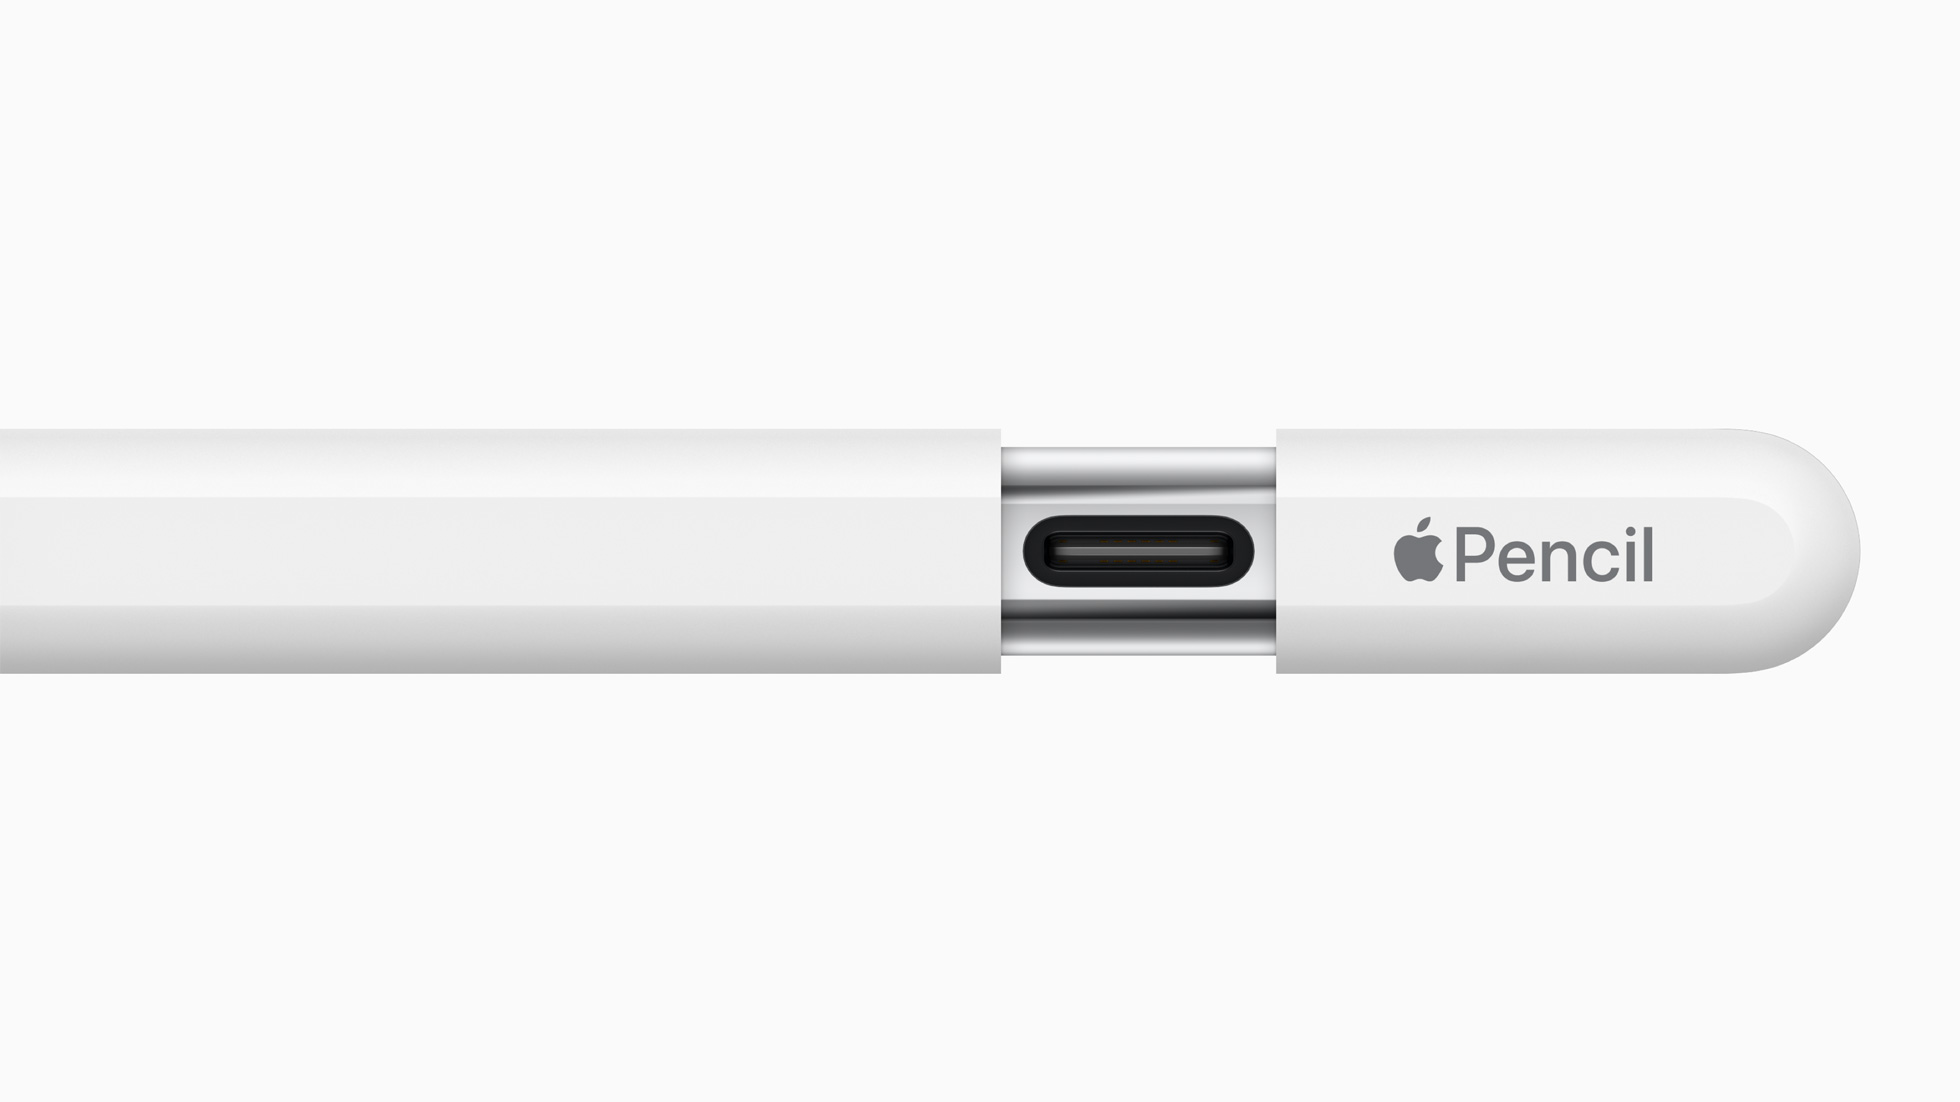 Apple's cheaper Pencil is available to buy now, but it has some 